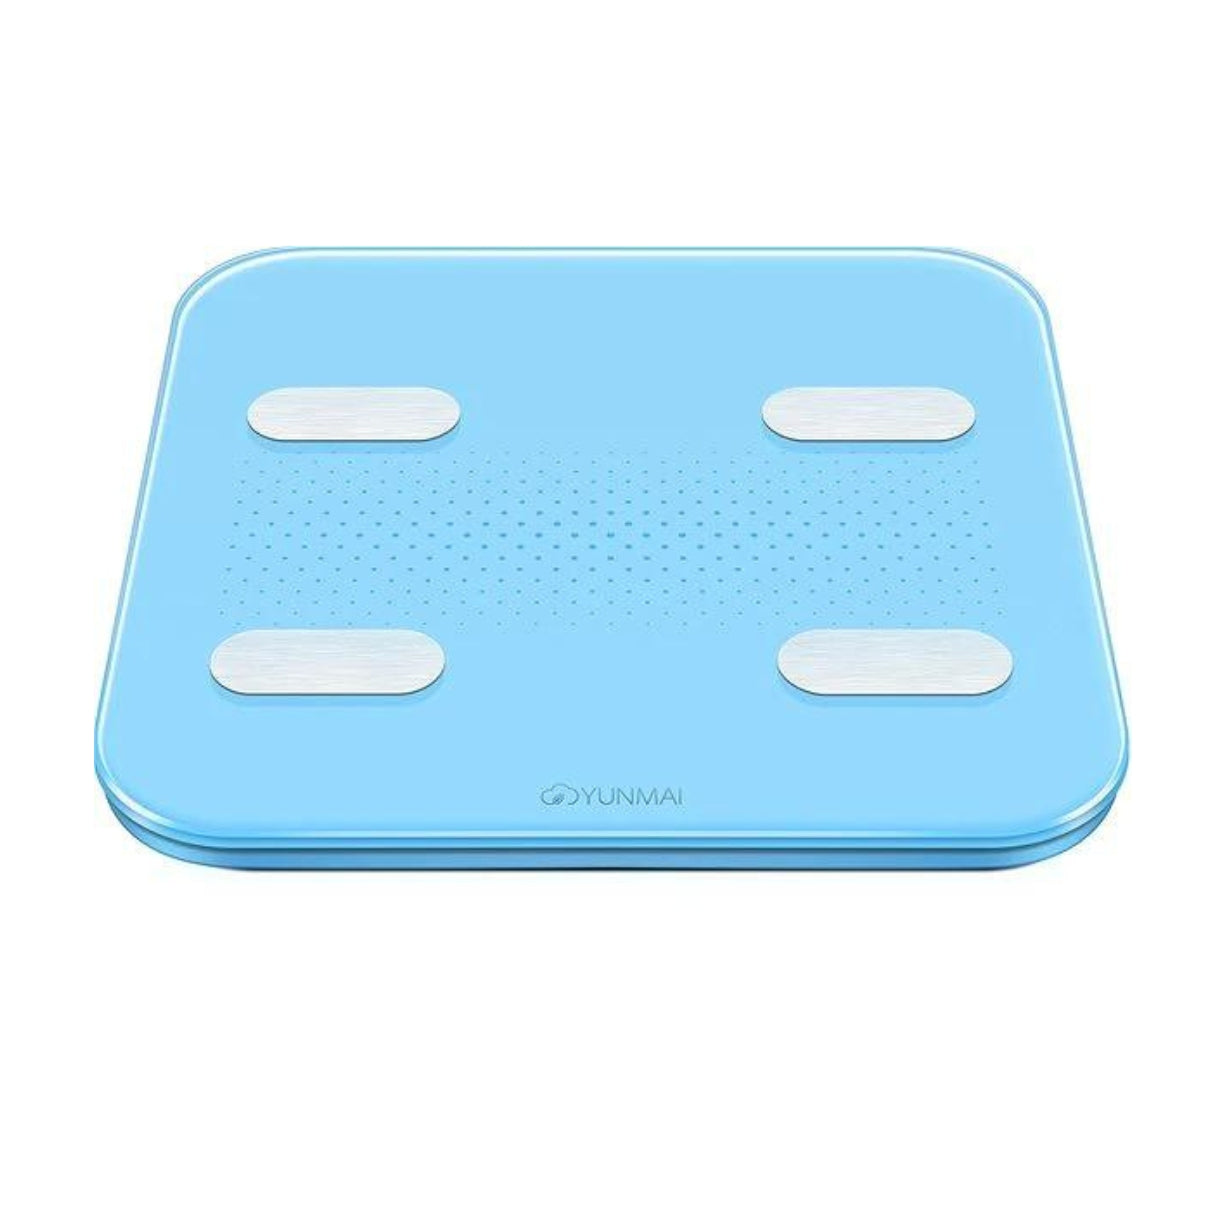 Yunmai Smart Scale 3 review - user-friendly daily weight tracking